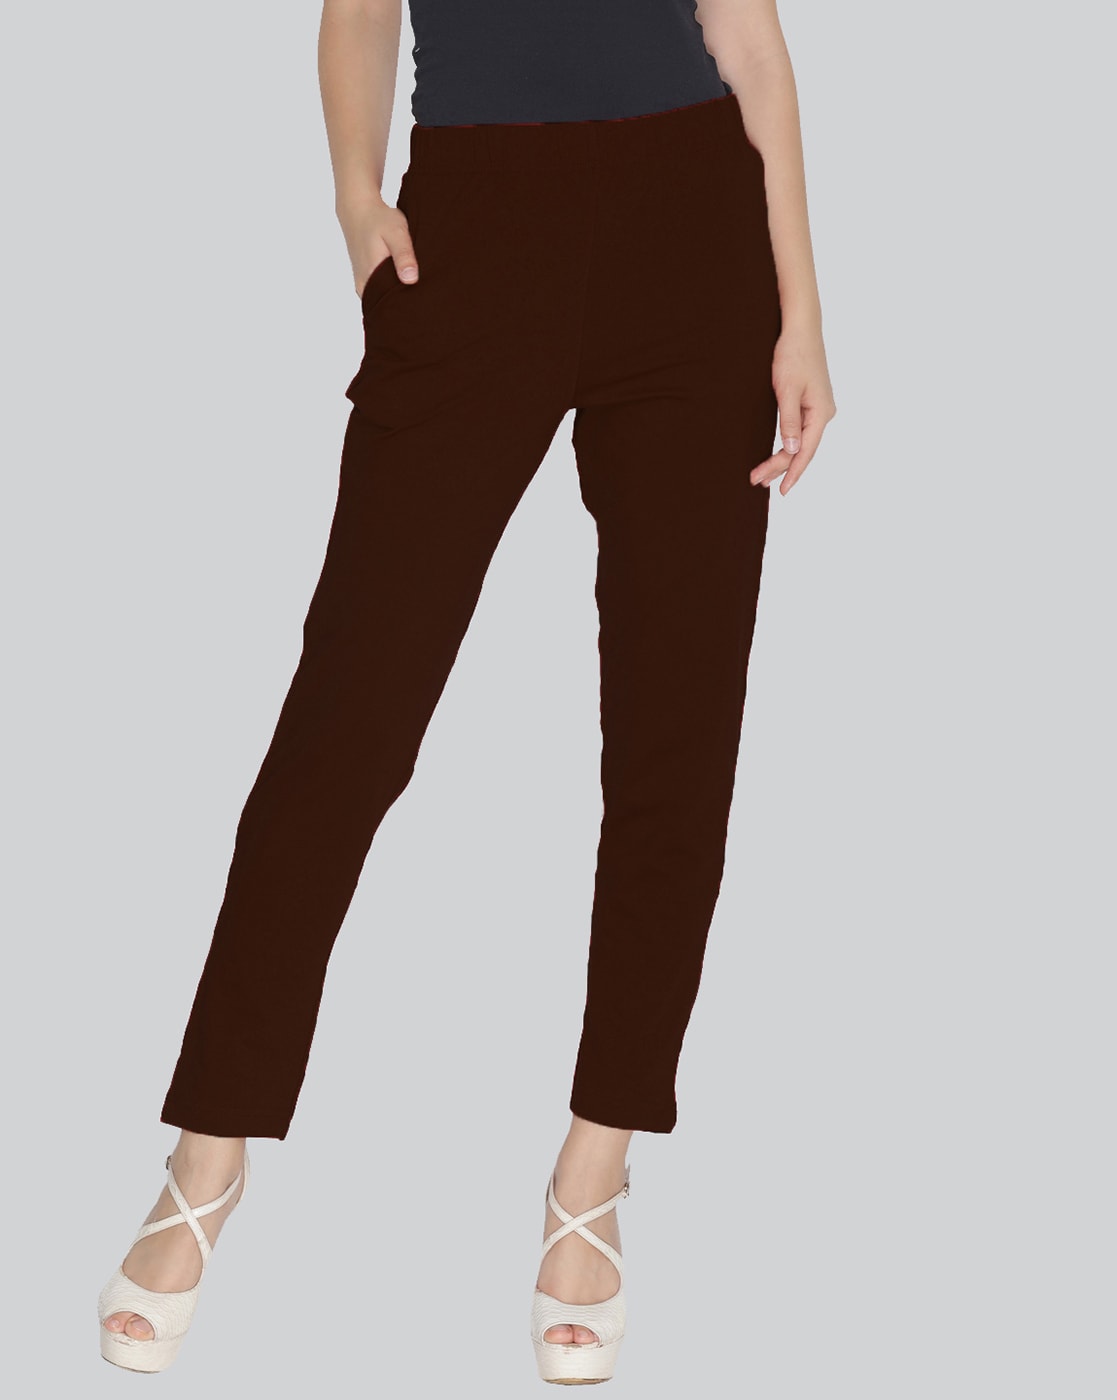 Active Sports Pants 360 Stretch Slim Fit Dark Brown  Gloot by Nykaa